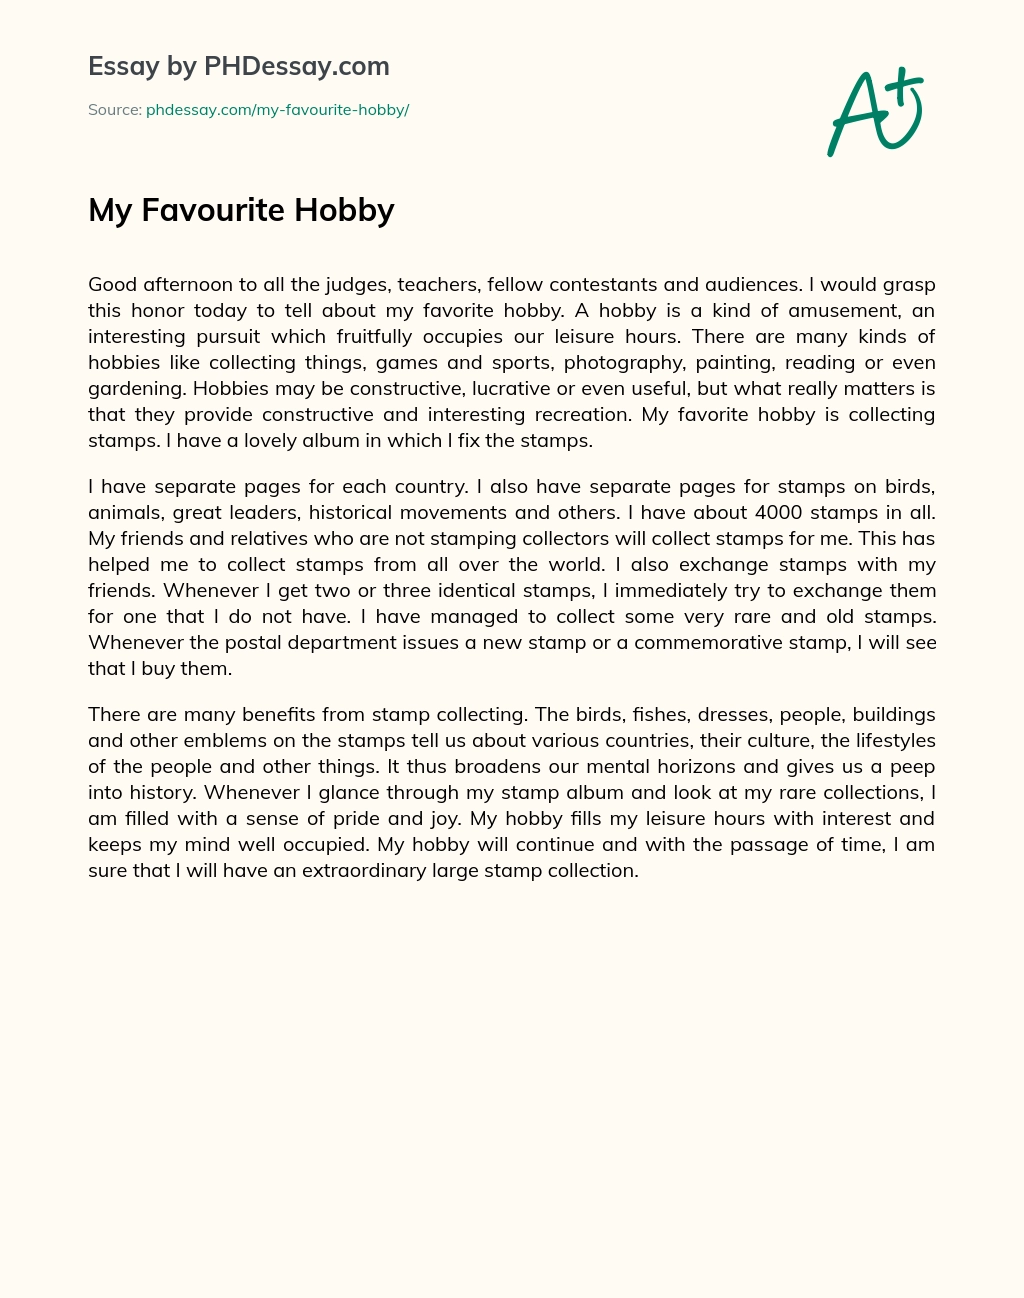 opinion essay about hobby